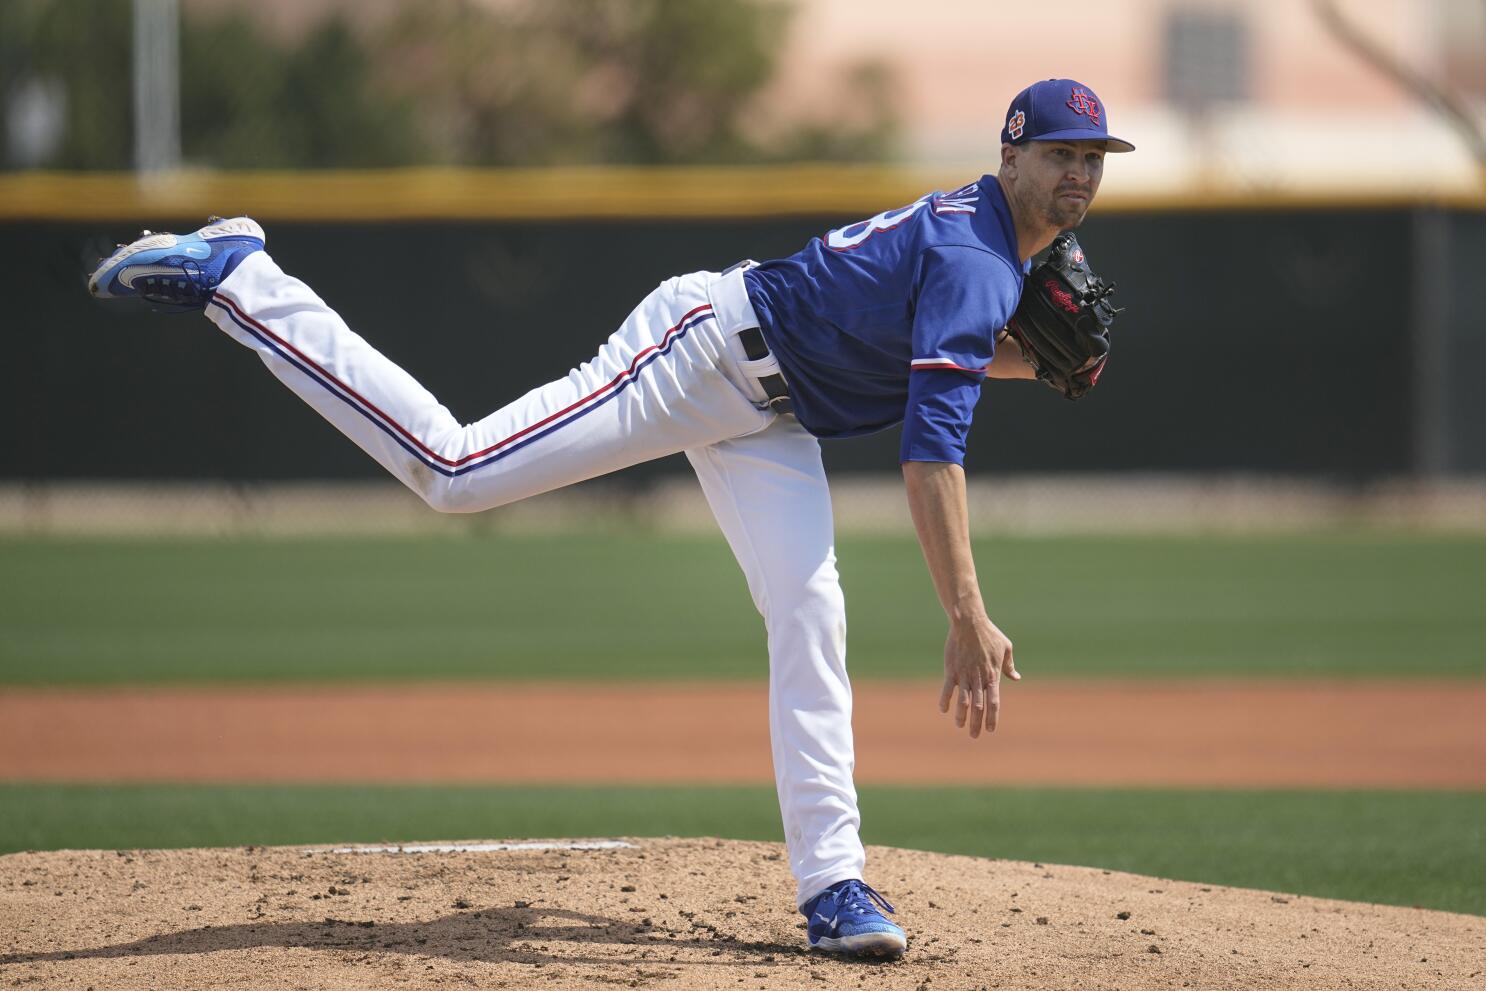 Rangers may spend big on pitching, but what options does Texas